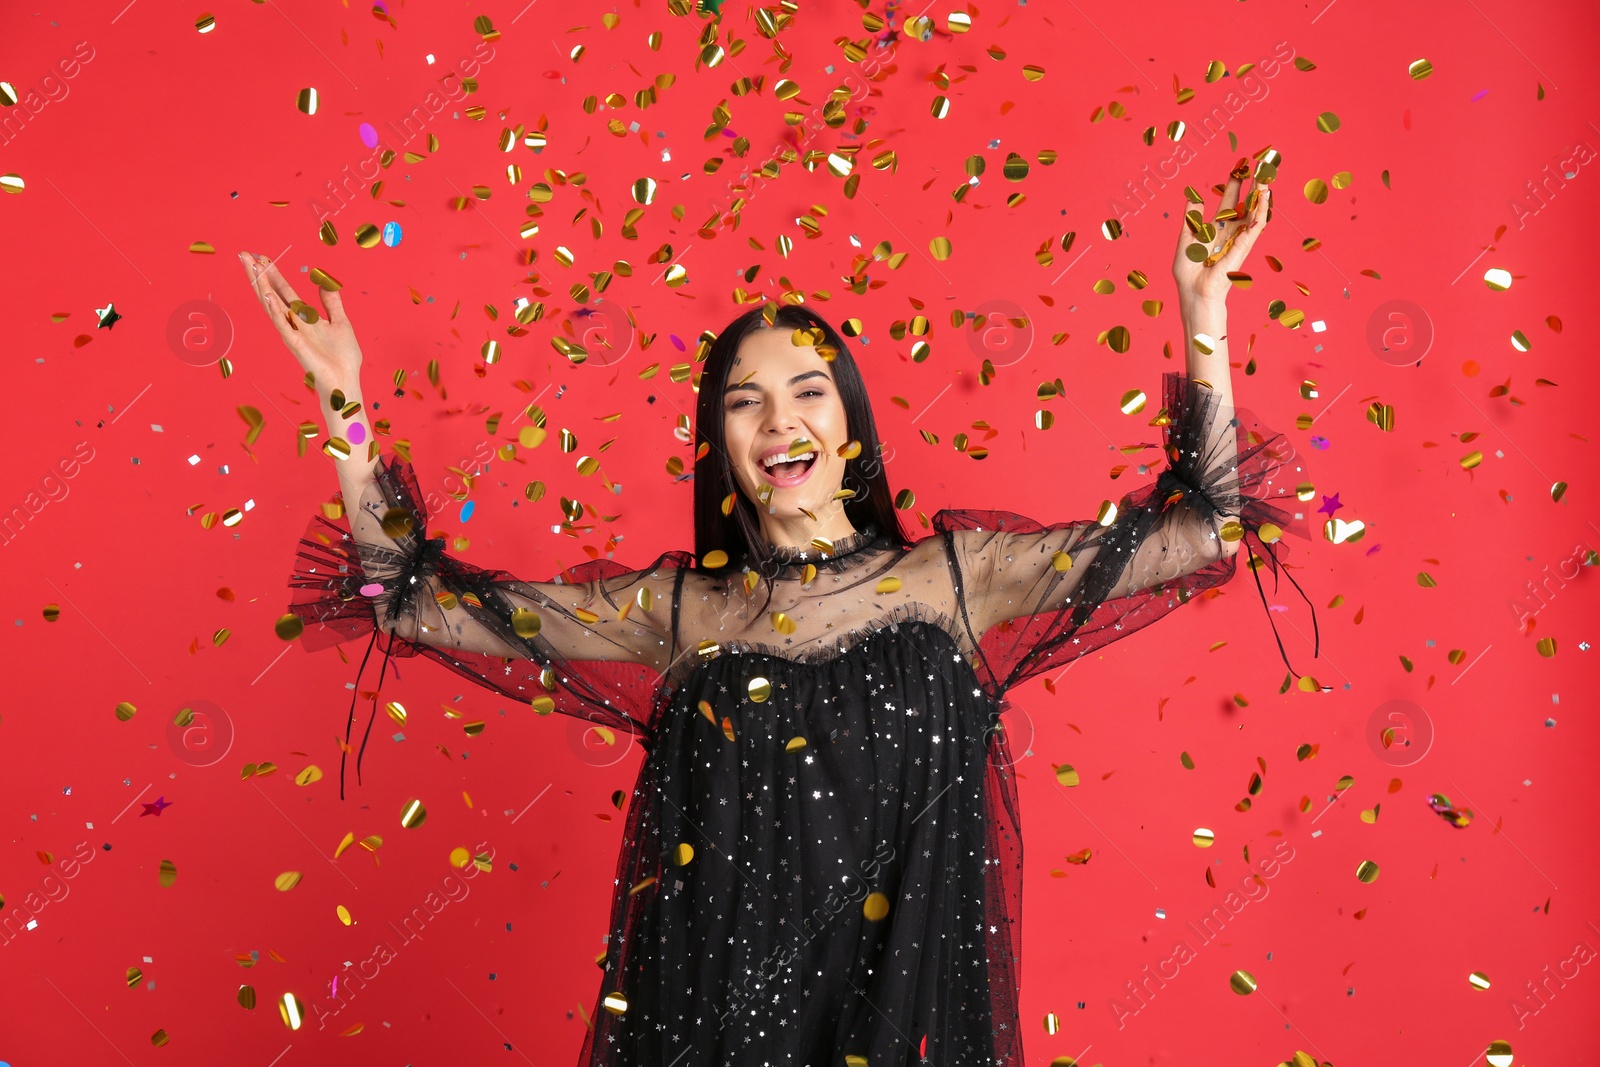 Photo of Emotional woman and falling confetti on red background